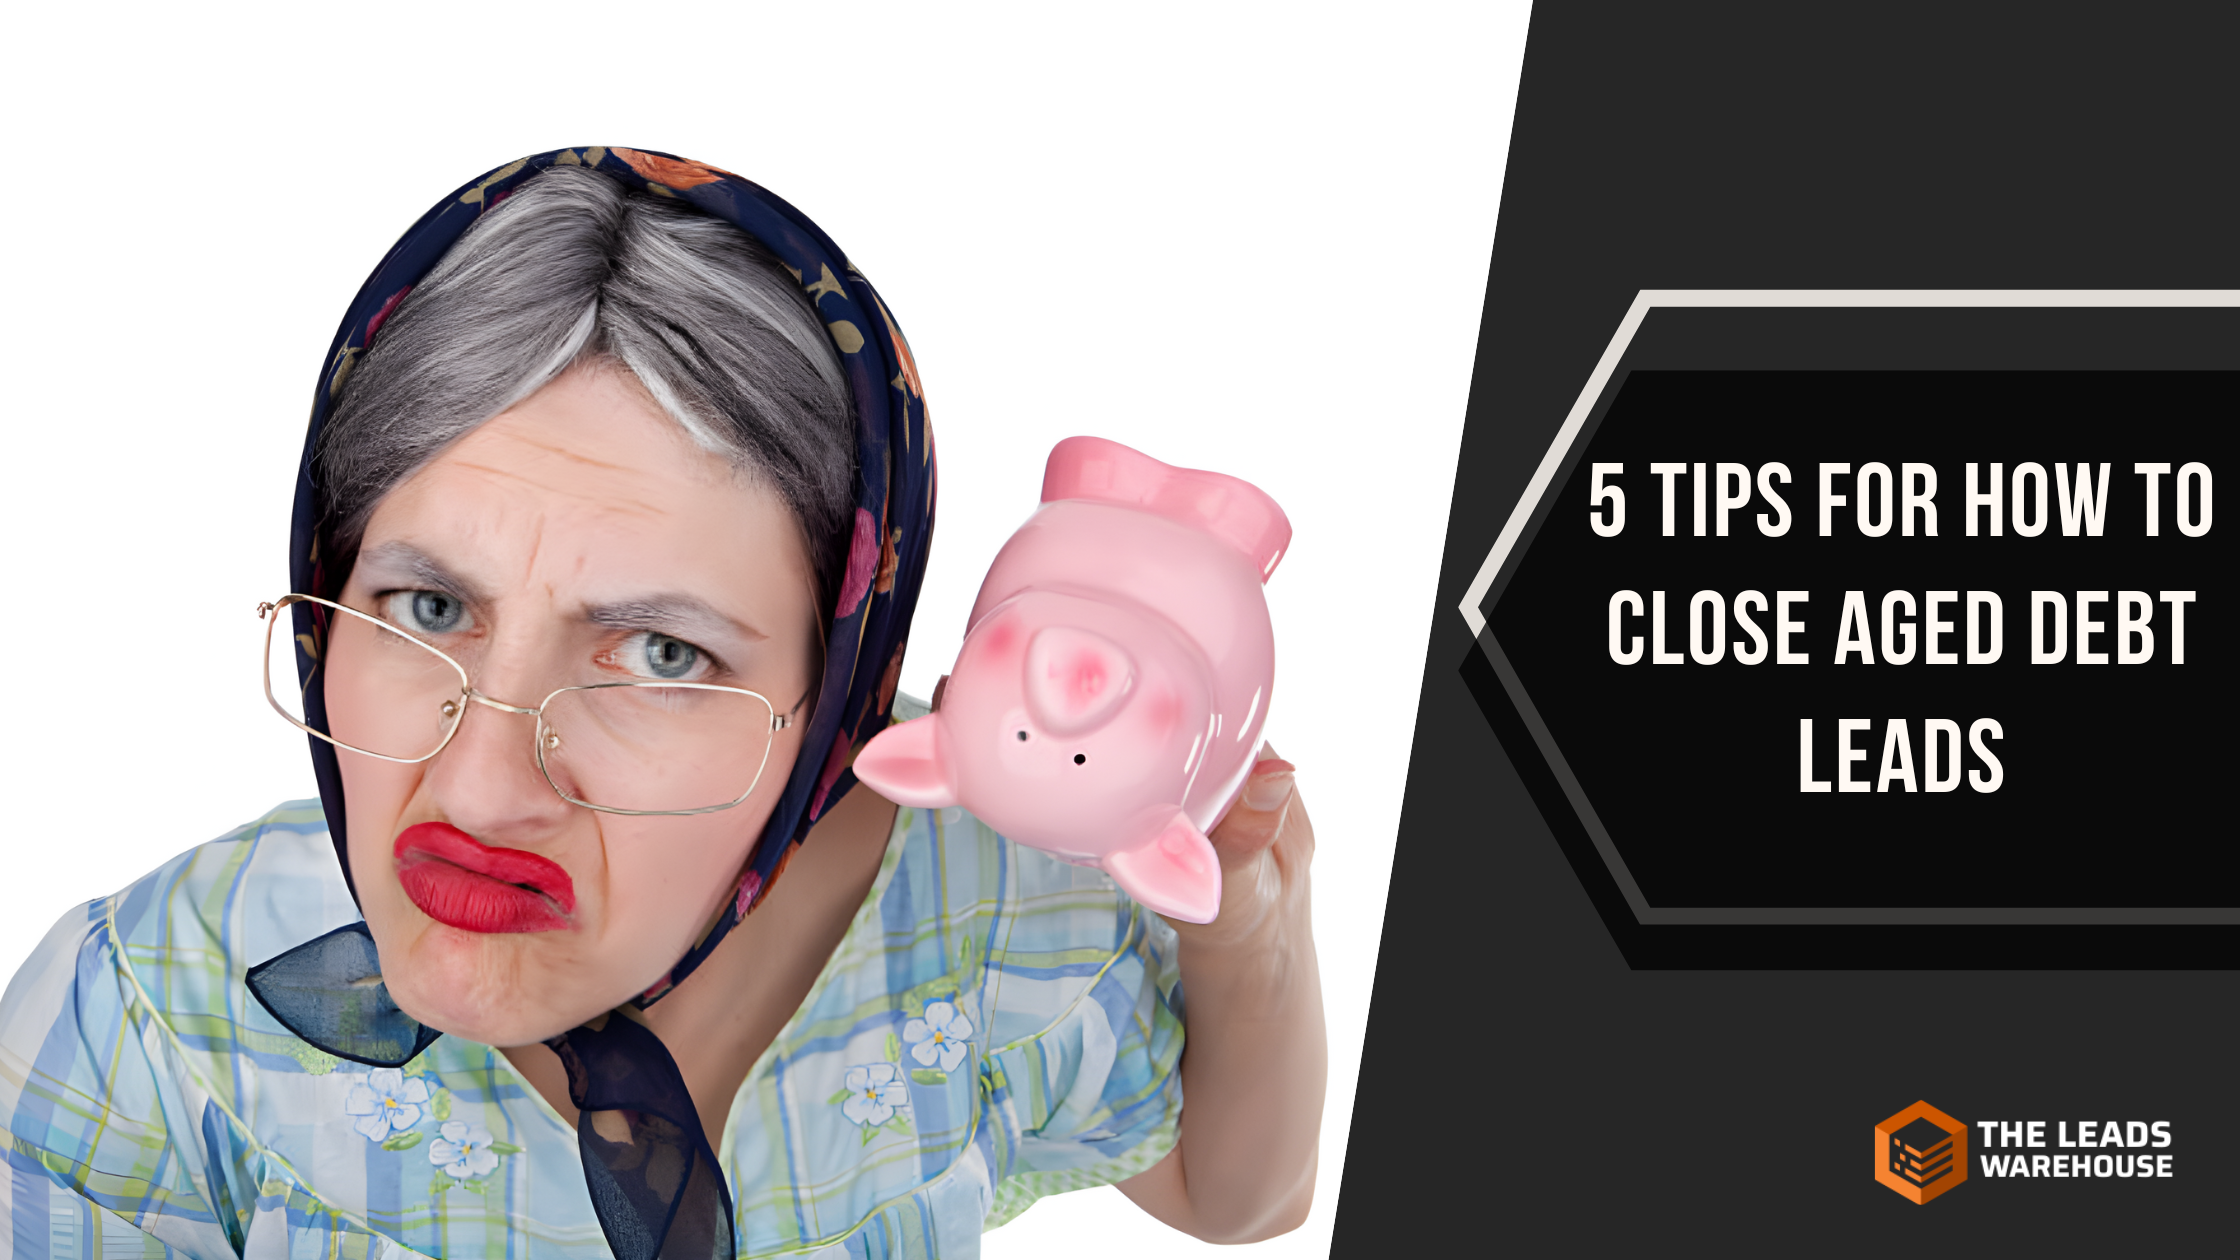 Close Aged Debt Leads | 5 Tips